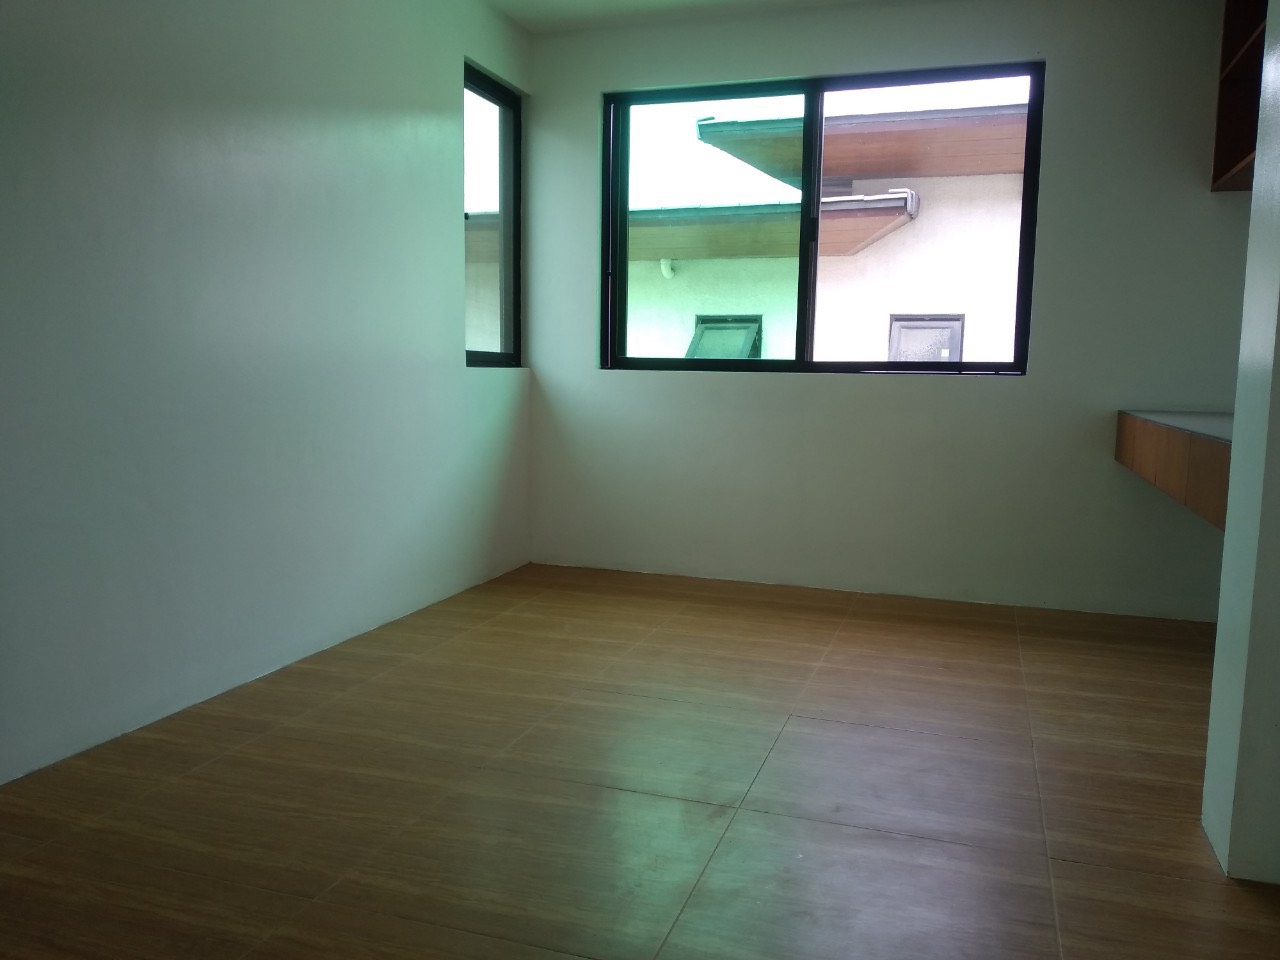 5 Bedrooms House For Rent, McKinley Hill Village 15